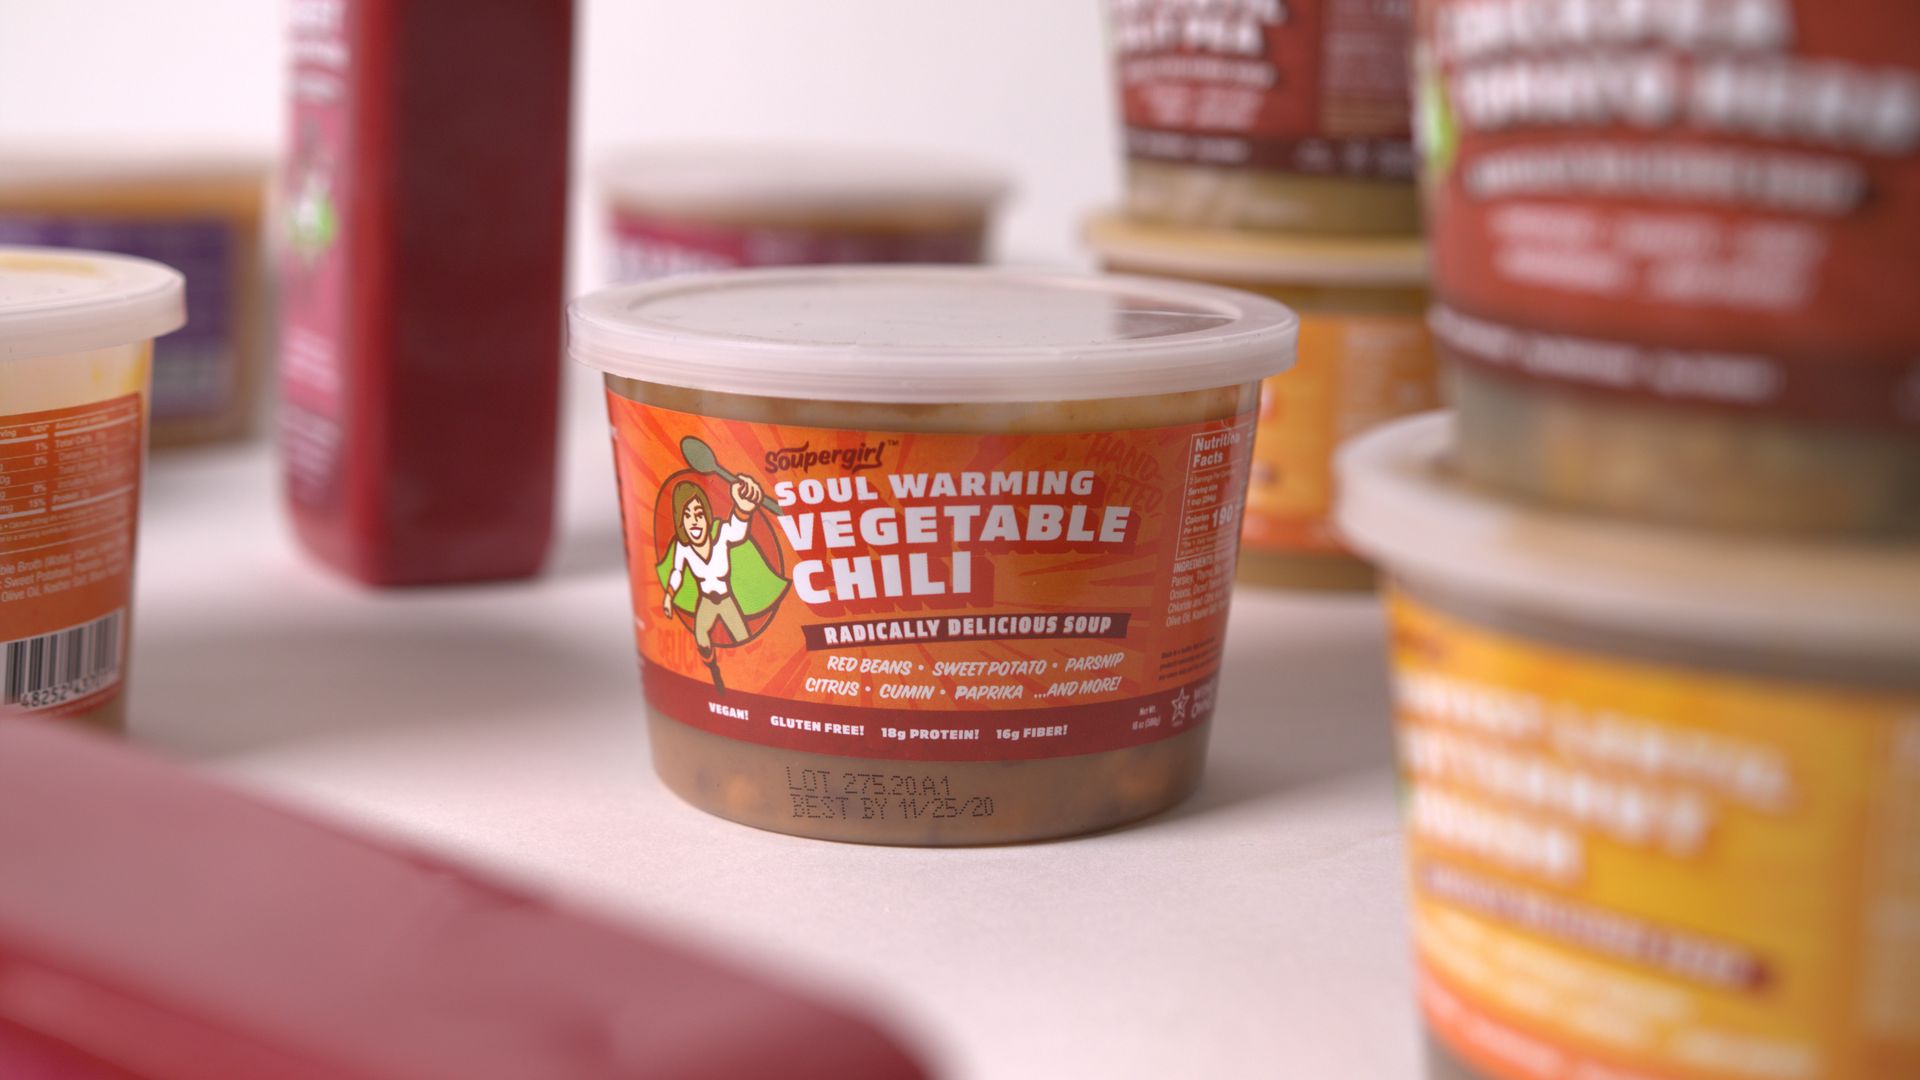 Vegetable chili, one of SouperGirl's soup flavors, is packaged in a plastic container.